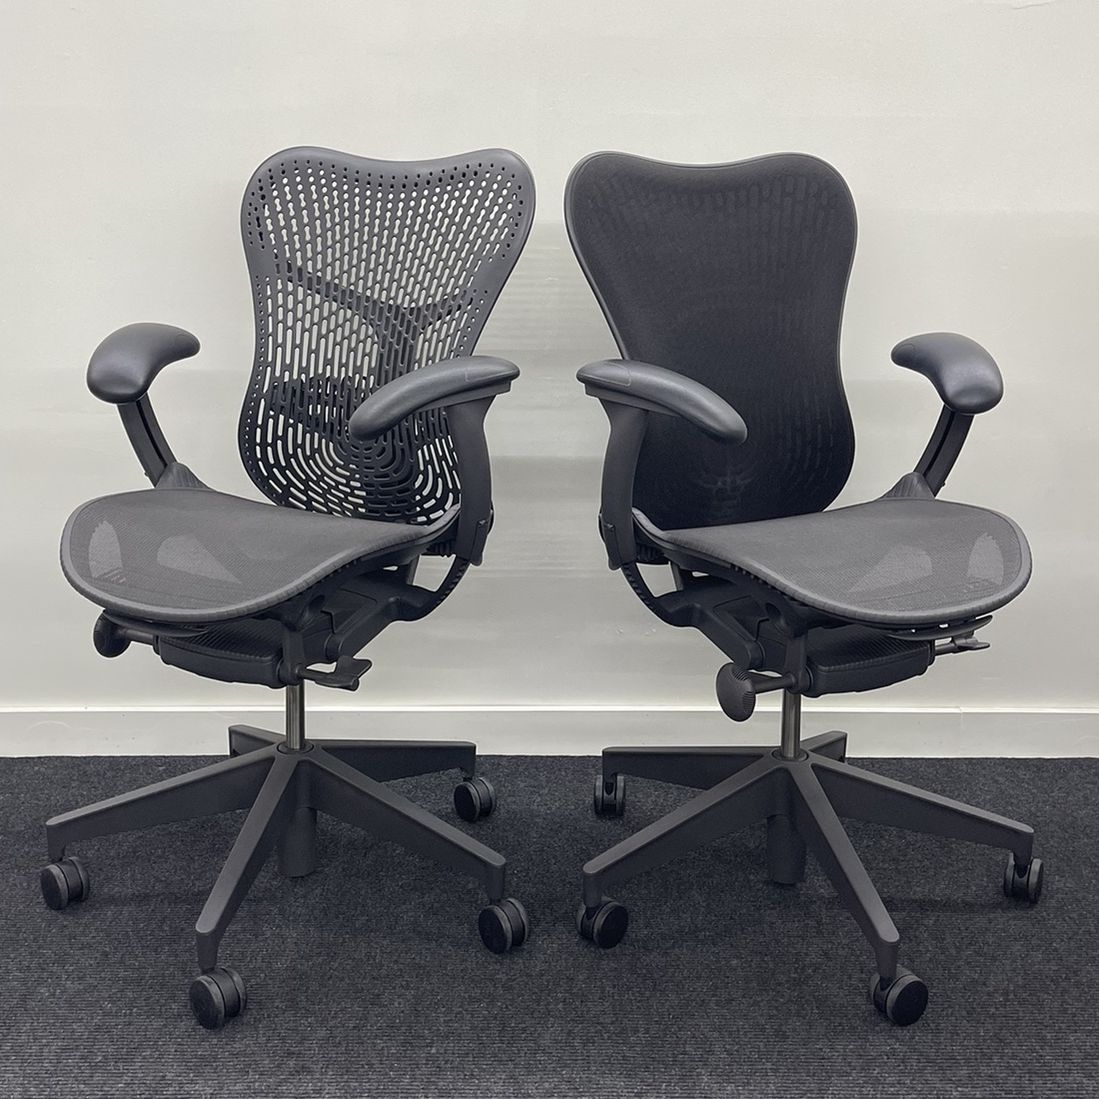 LIKE NEW HERMAN MILLER MIRRA CHAIRS FULLY LOADED WITH LUMBAR SUPPORT! 🚚🚚DELIVERY AVAILABLE🚚🚚